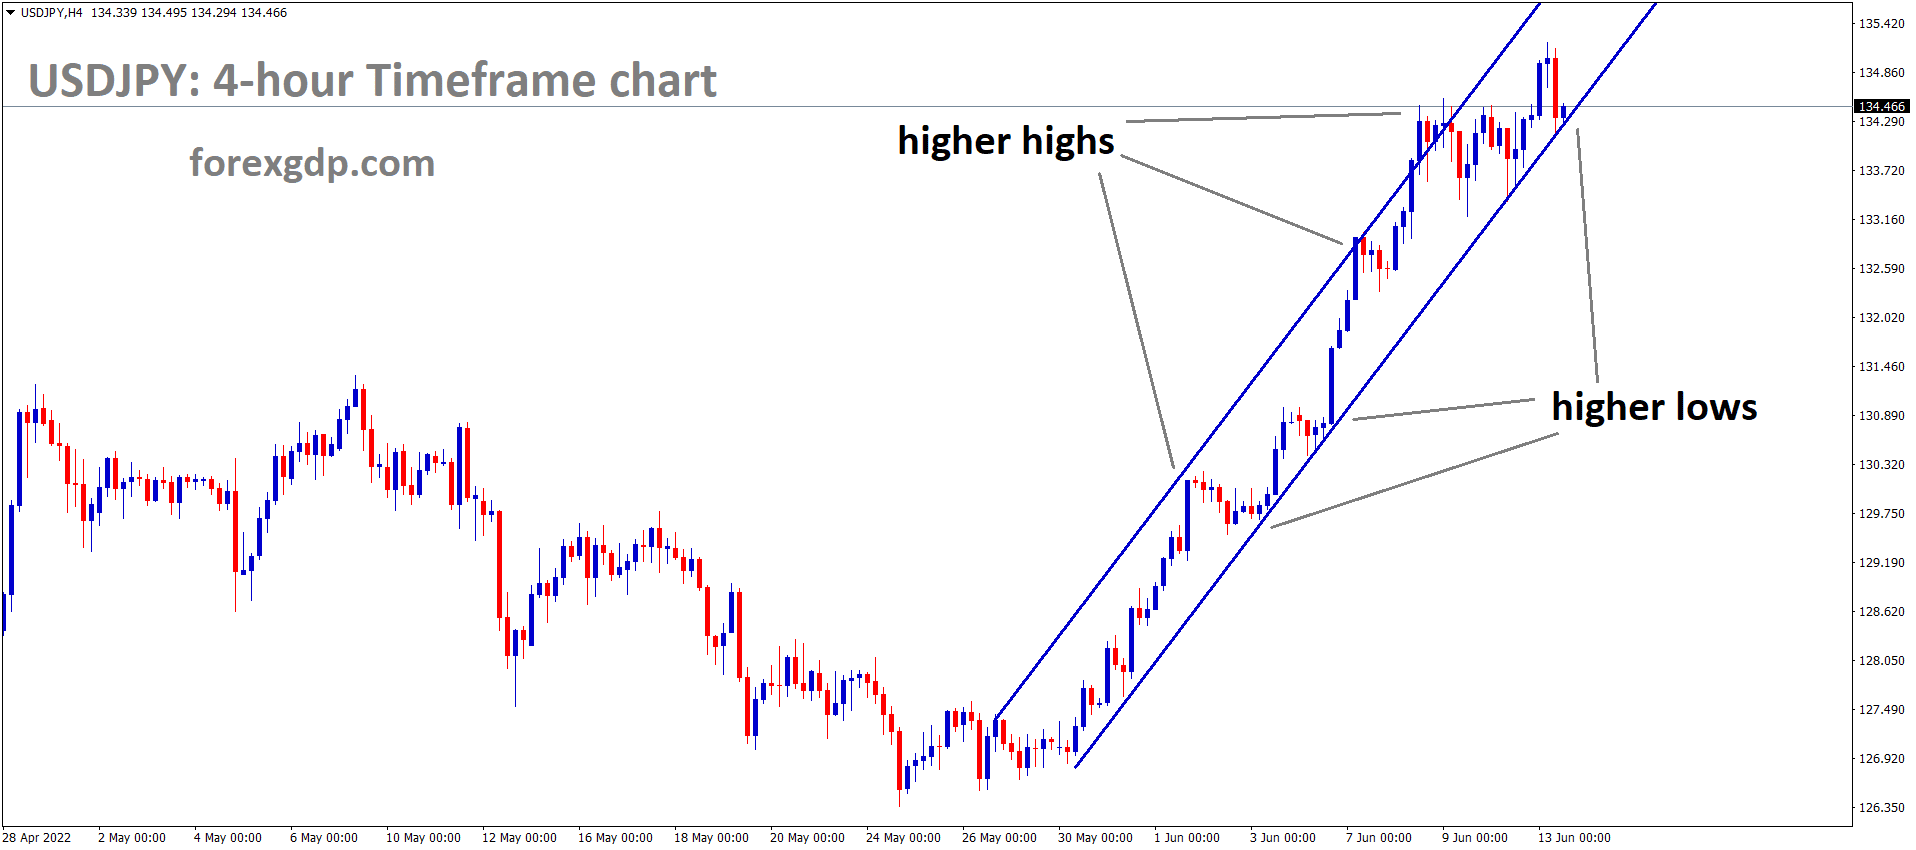 USDJPY is moving in an Ascending channel and the Market has rebounded from the higher low area of the channel 1